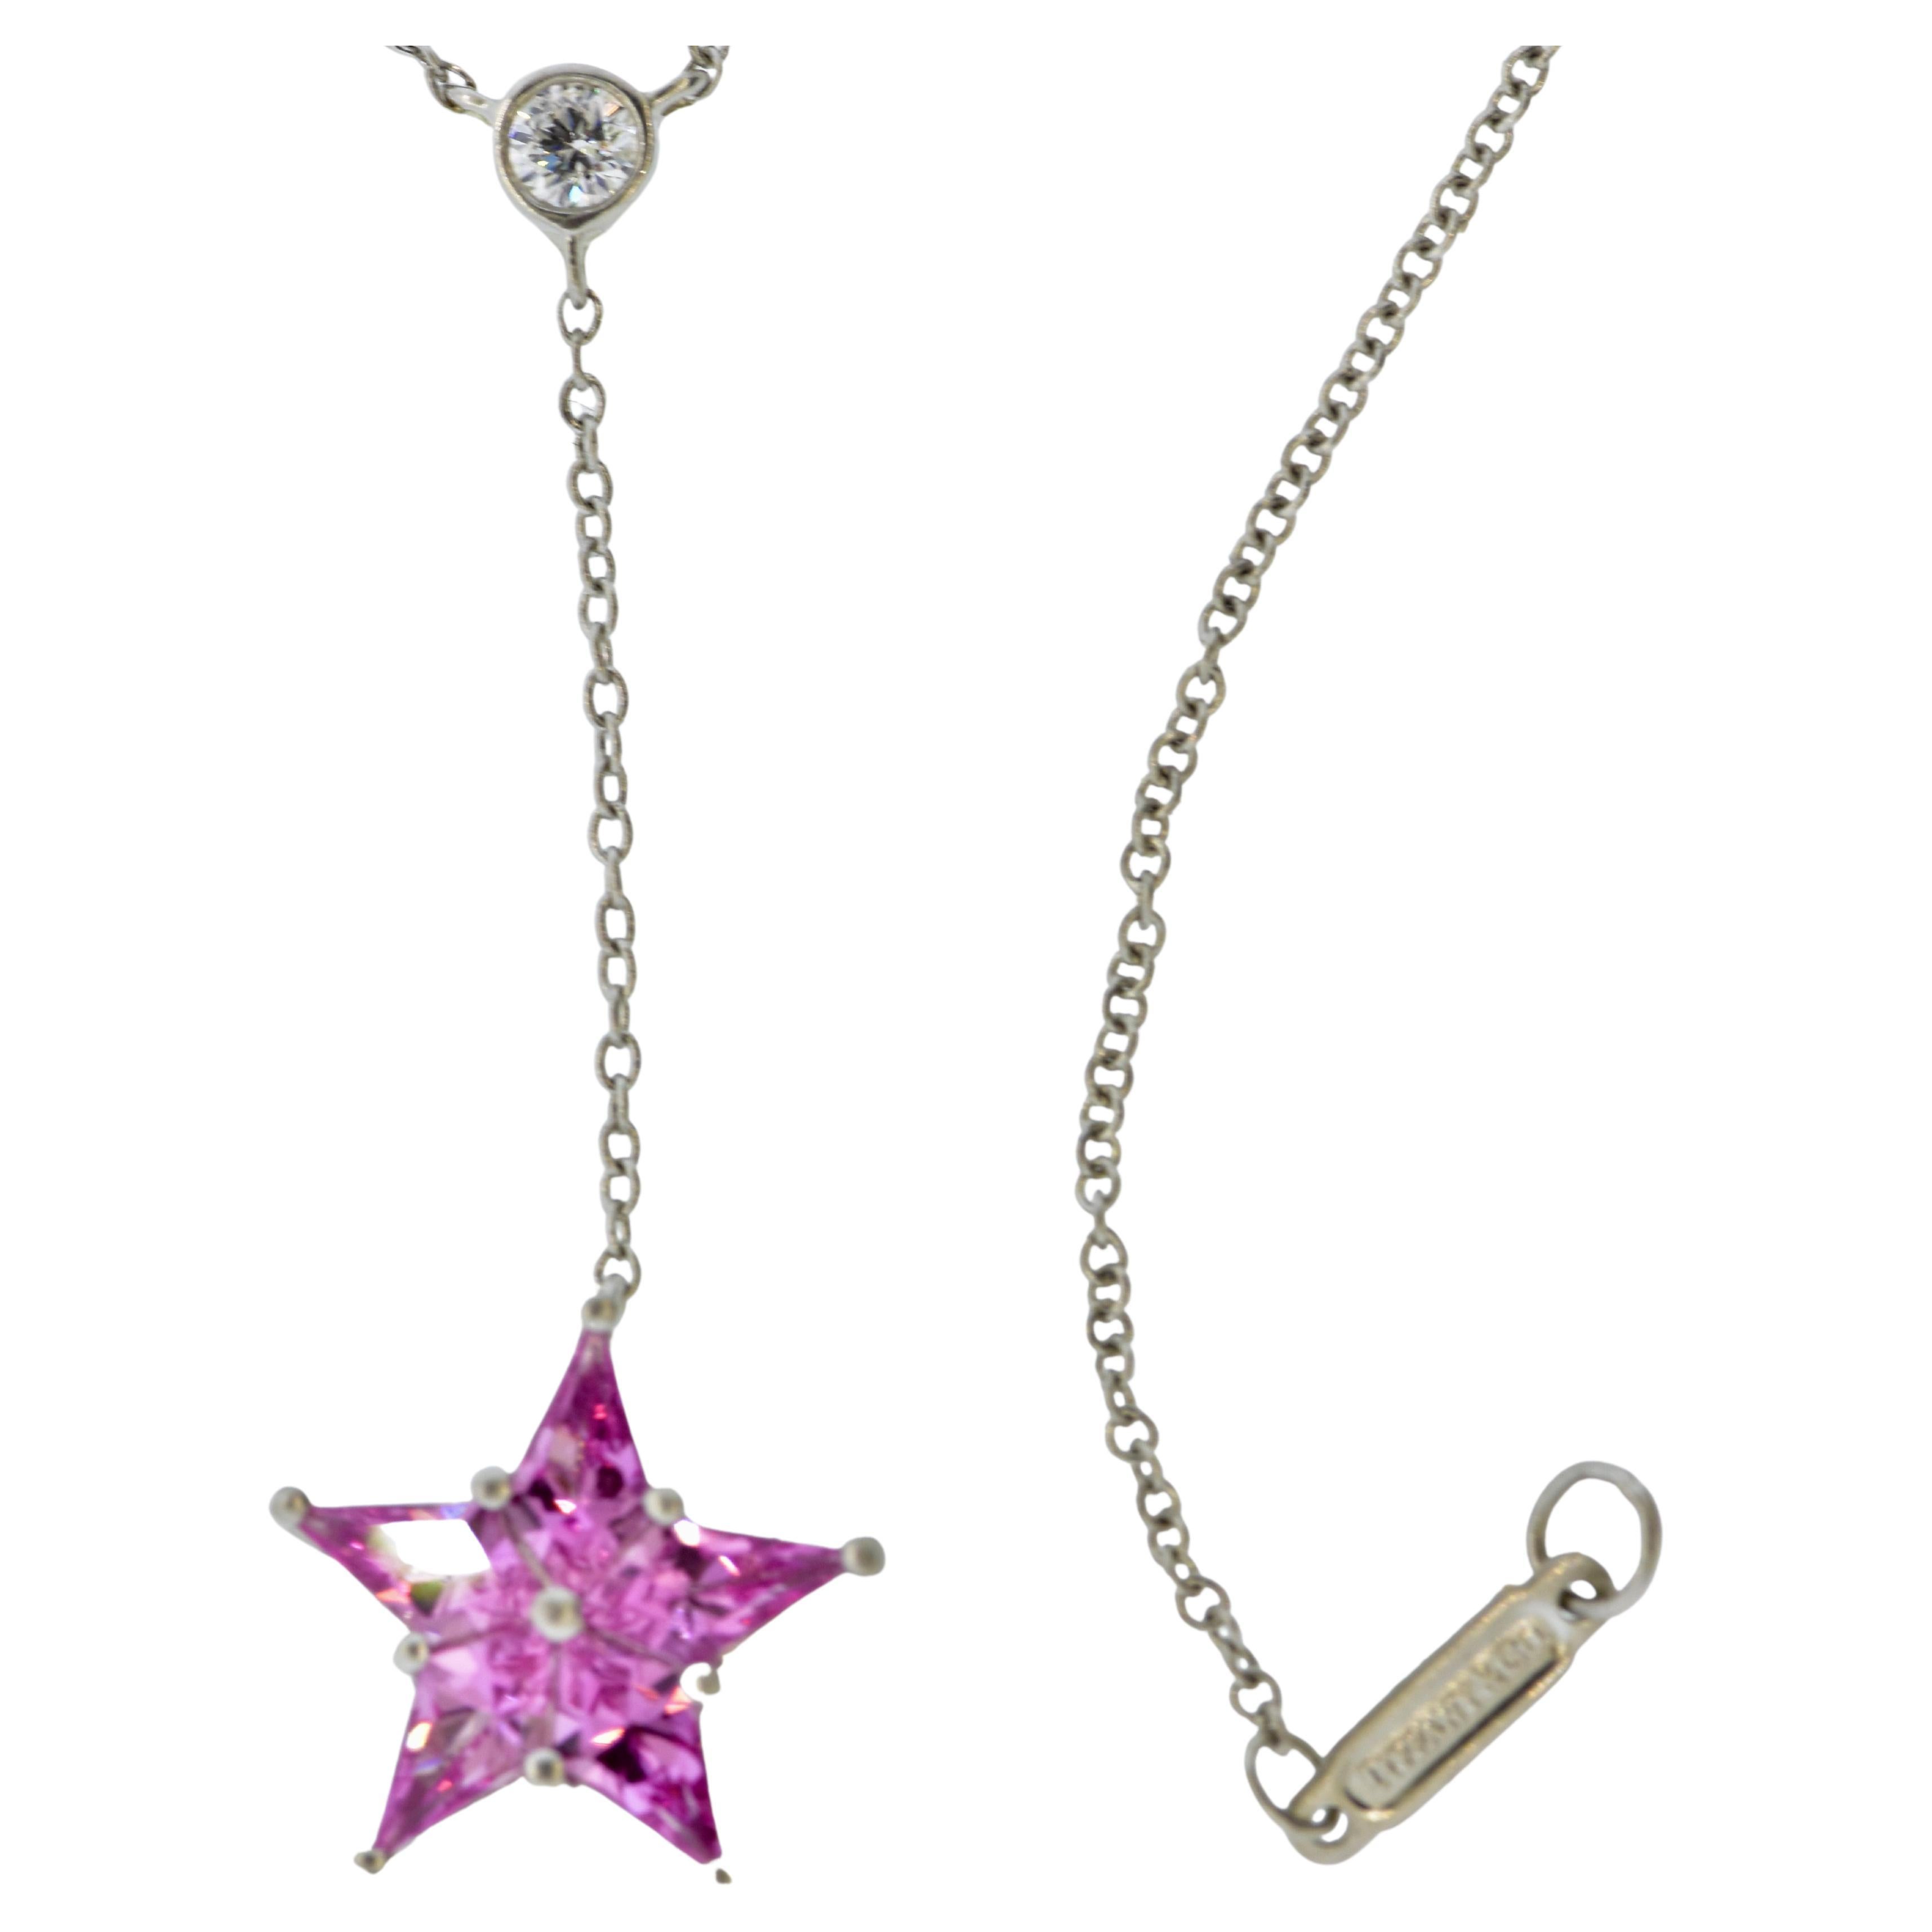 Pink Sapphire, Diamond and Platinum Star Motif Necklace by Tiffany & Co.